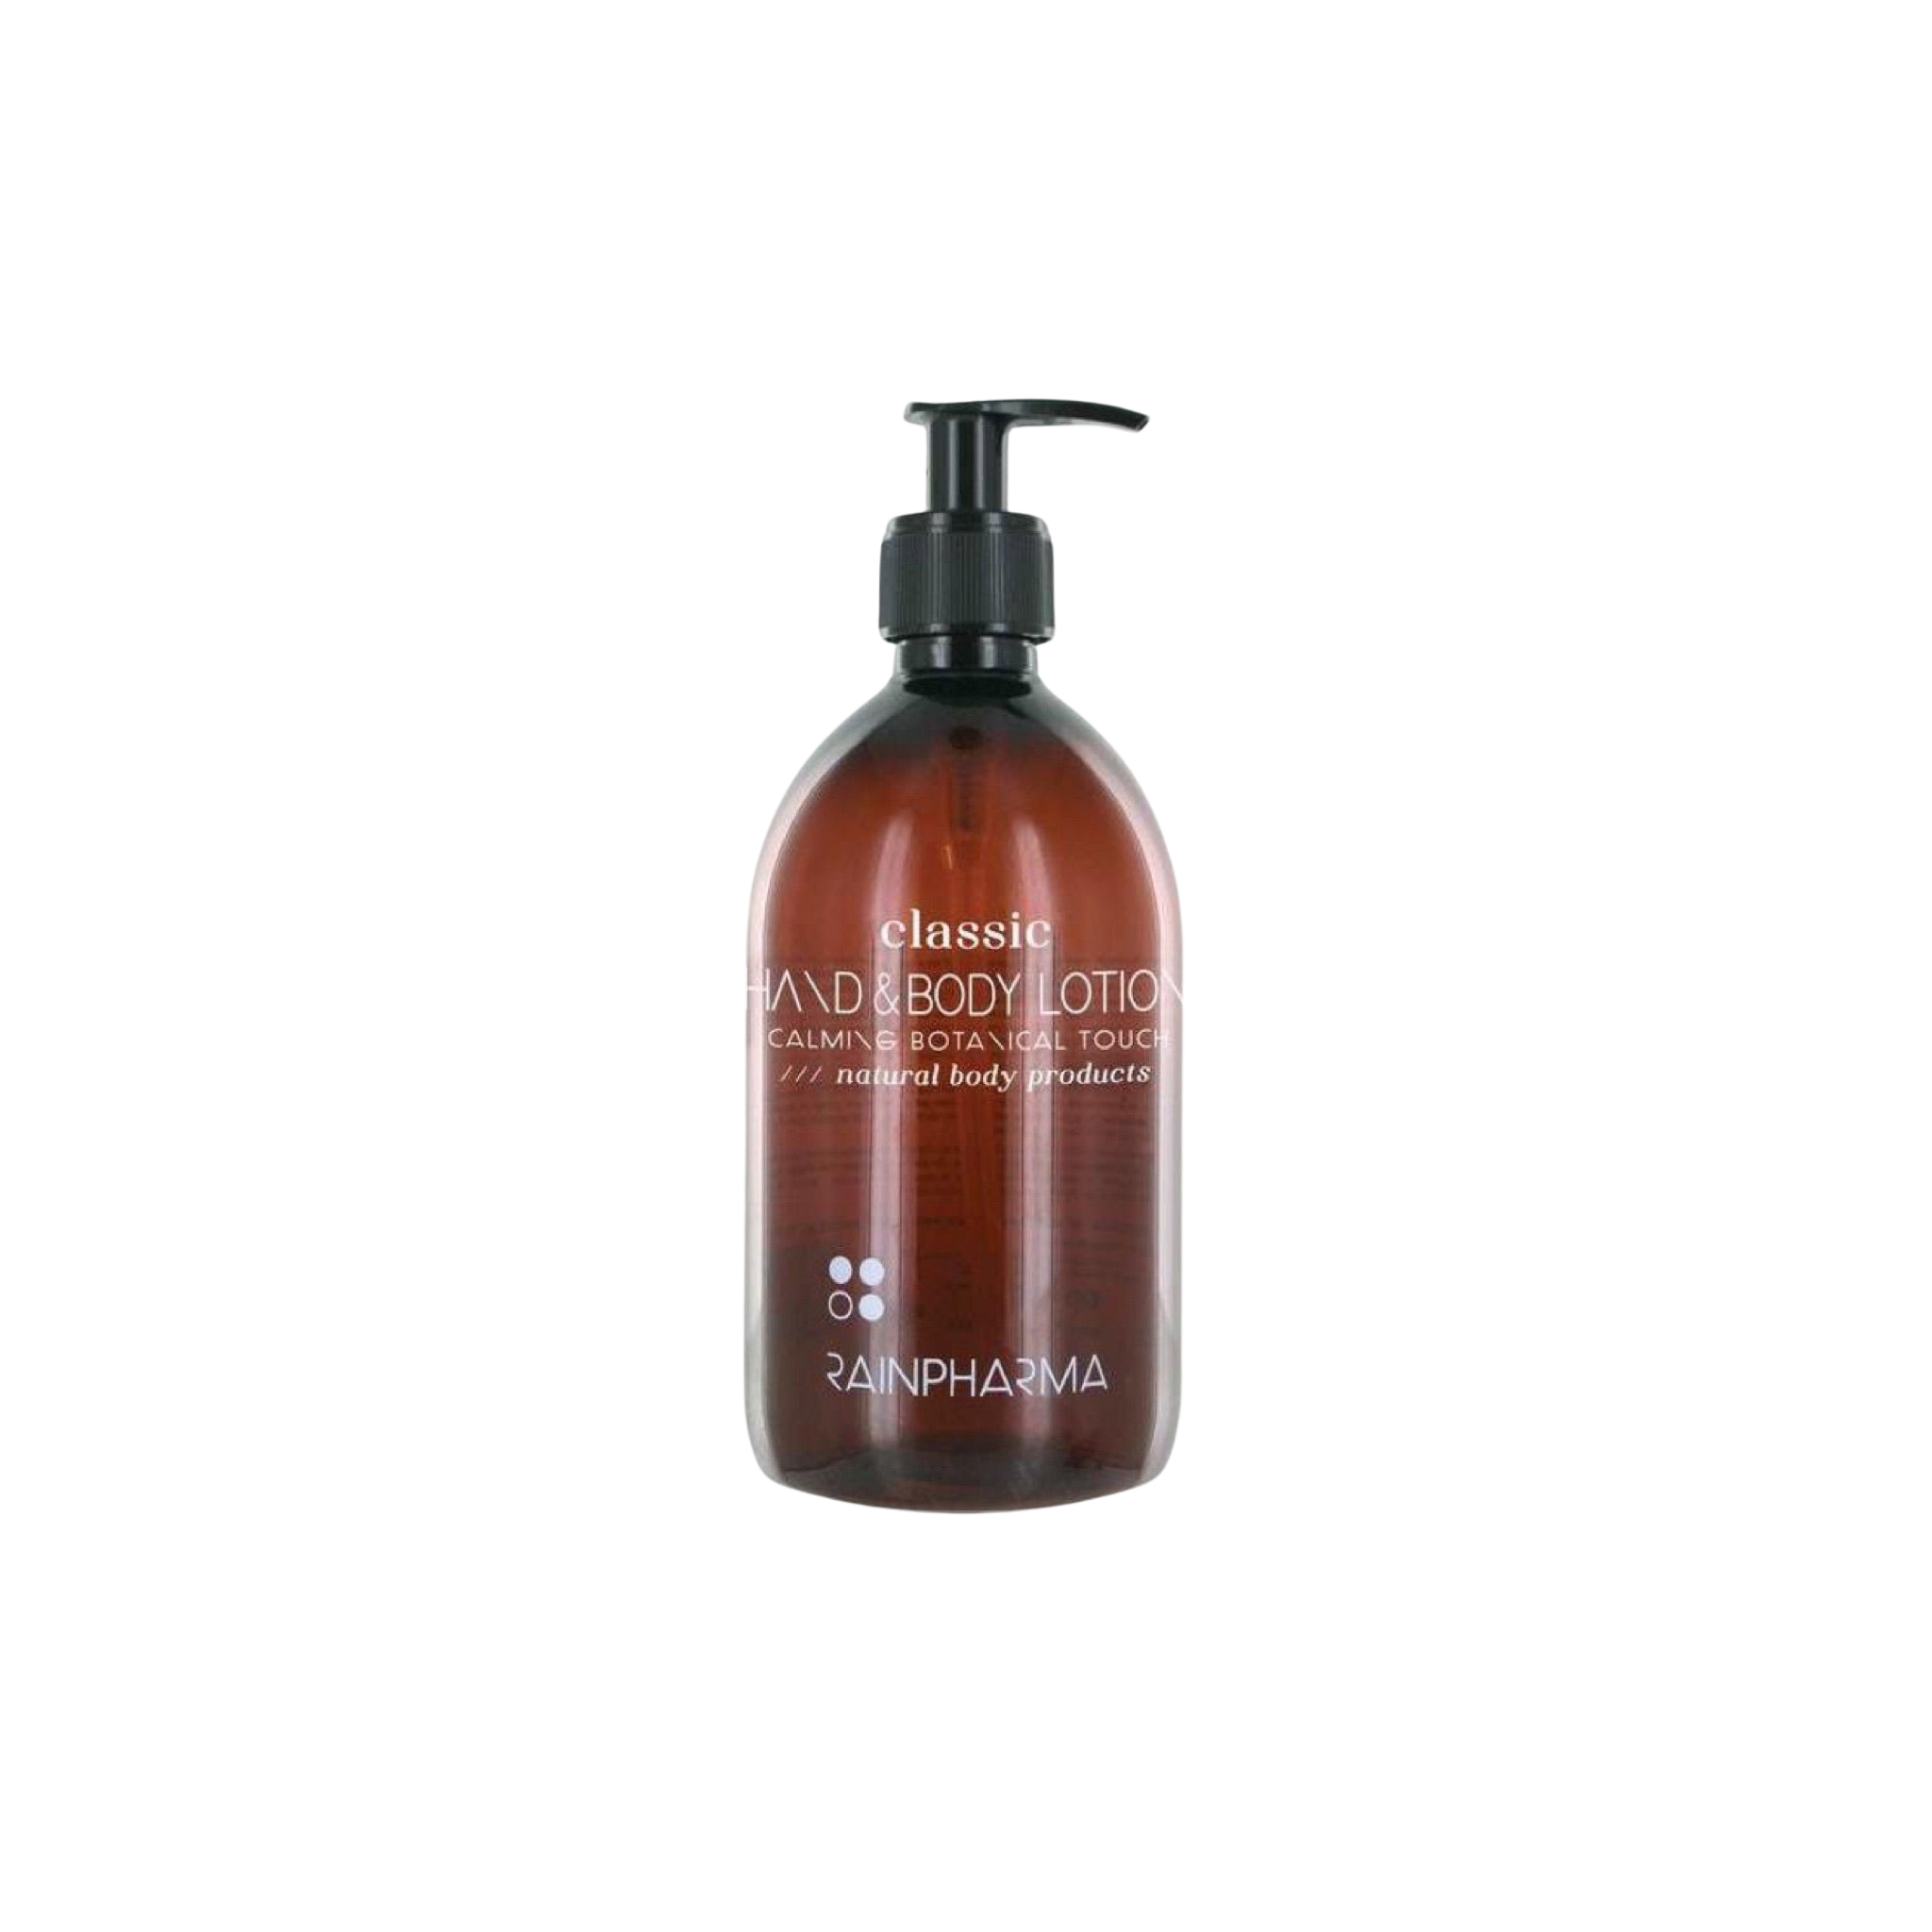 CLASSIC HAND & BODY LOTION